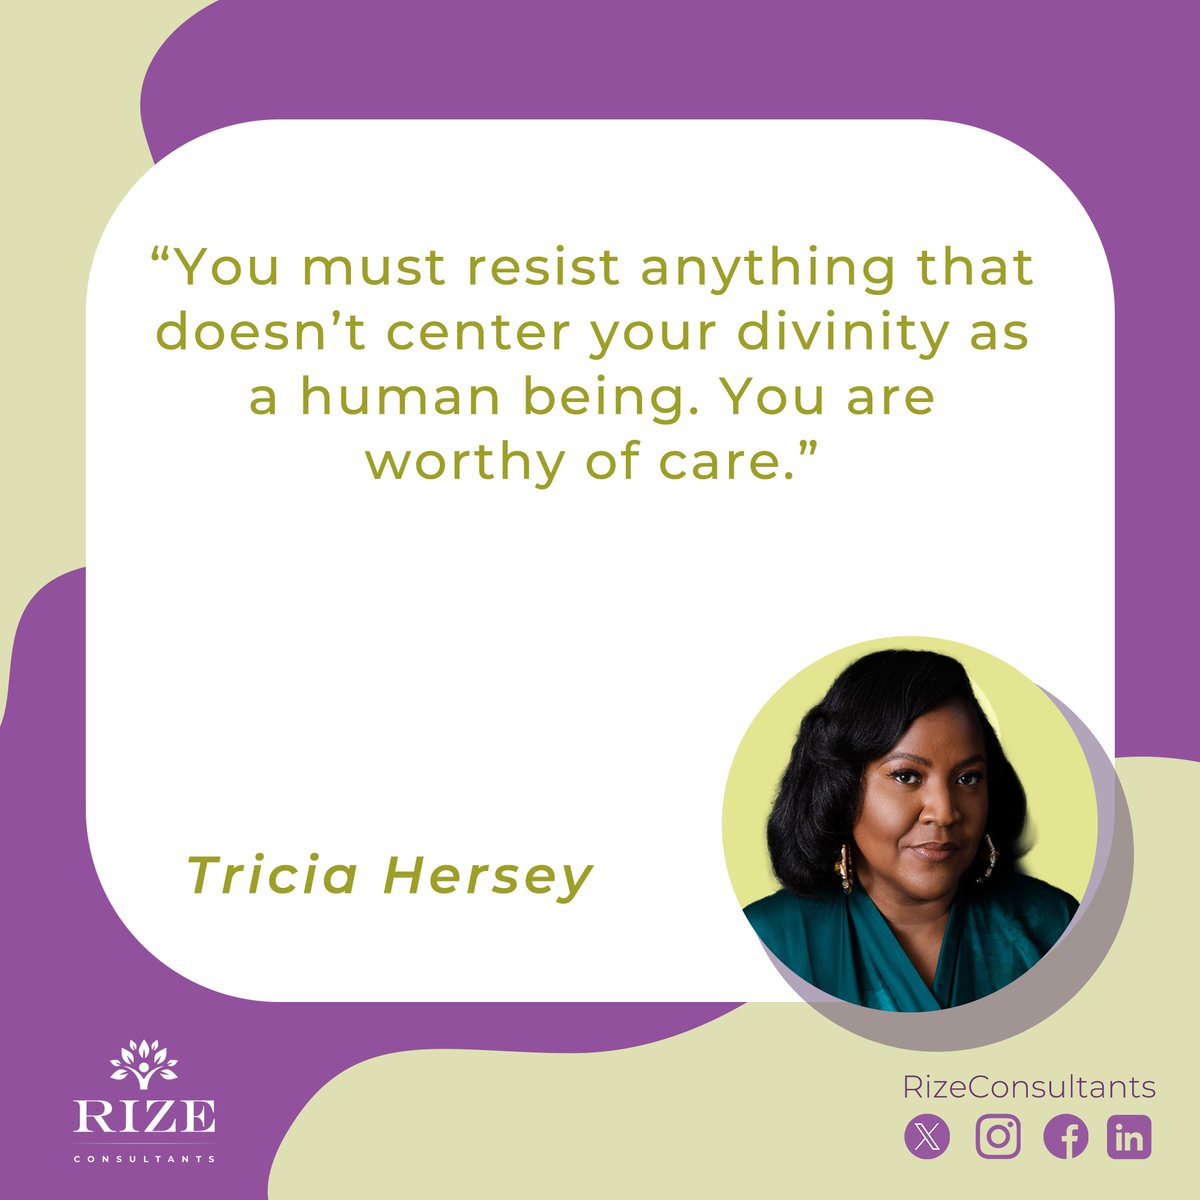 Embrace your inherent worth and the divinity within. Let's prioritize self-care and recognize our deservingness of it, not as a luxury, but as a fundamental right. 

#RizeConsultants #Rize #YouAreWorthy #SelfCareIsSacred #SelfCare